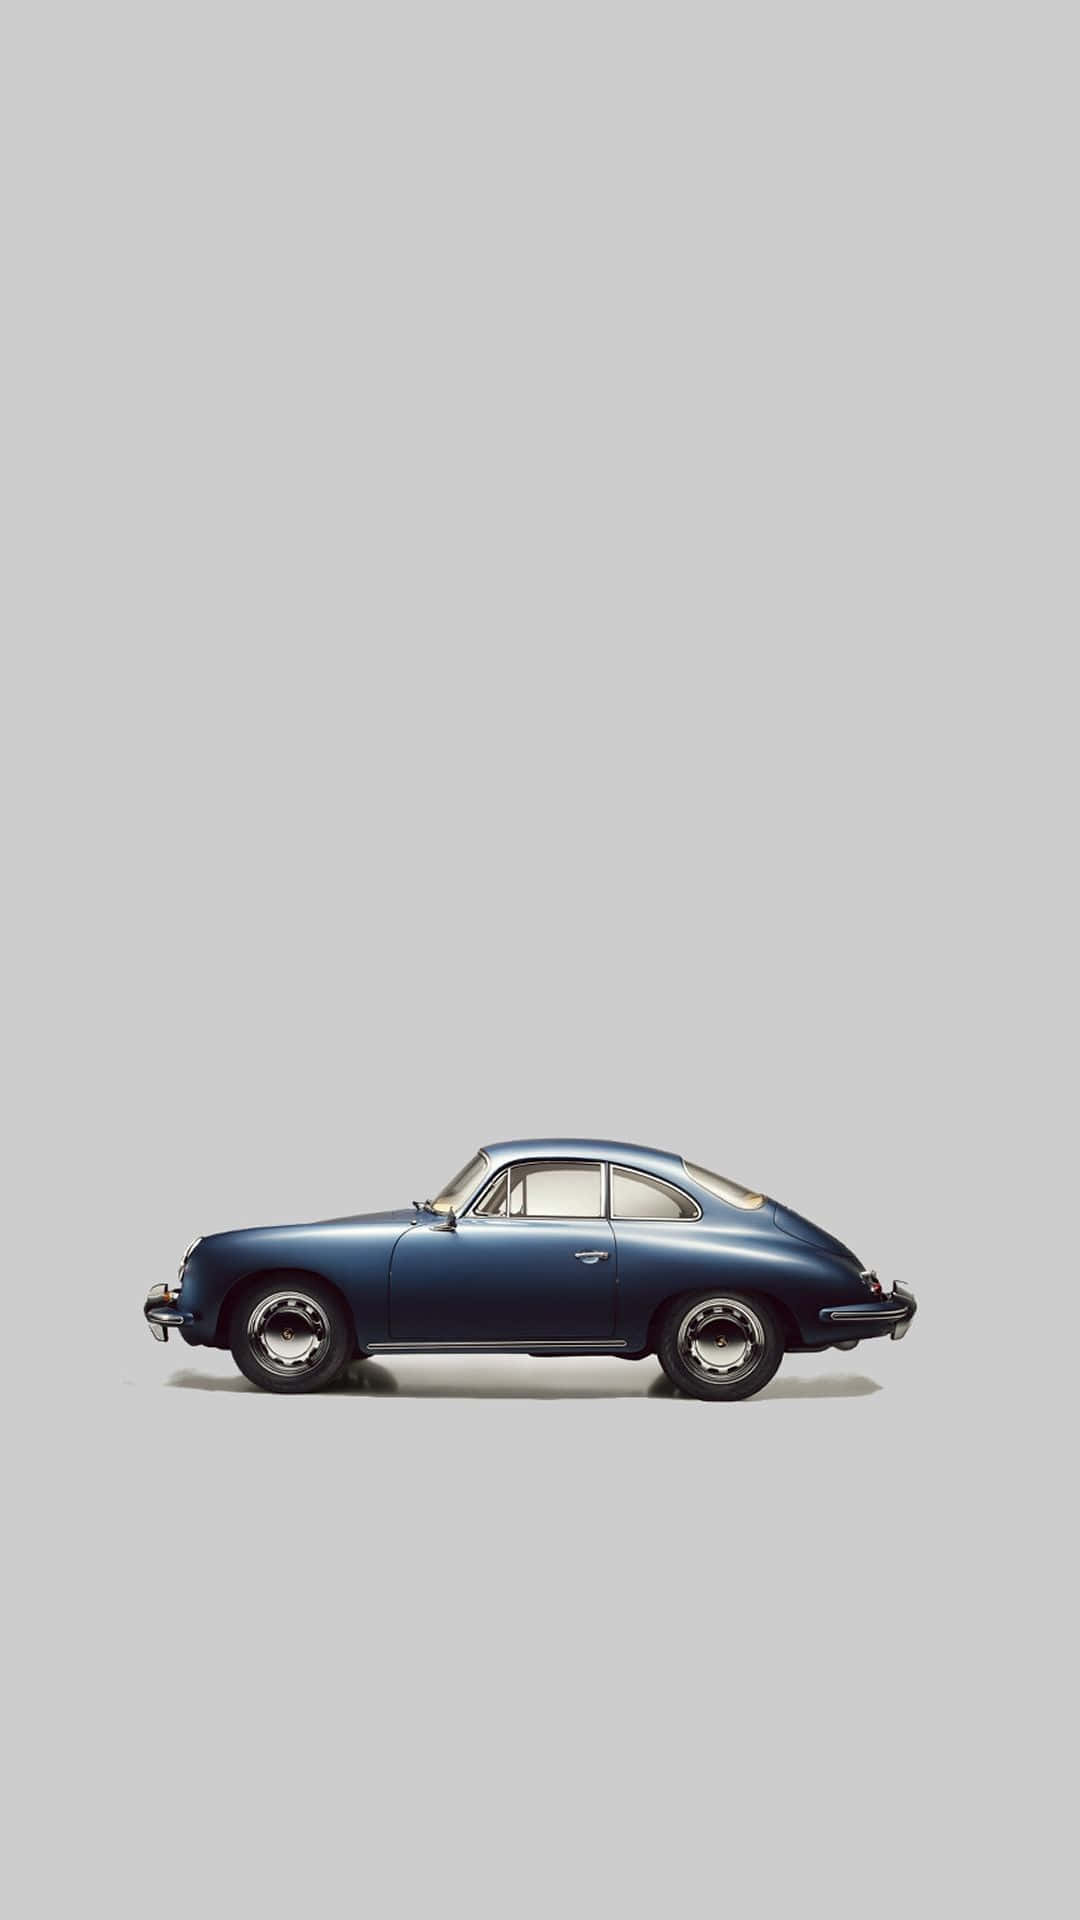 A Blue Car Is Shown Against A Gray Background Wallpaper